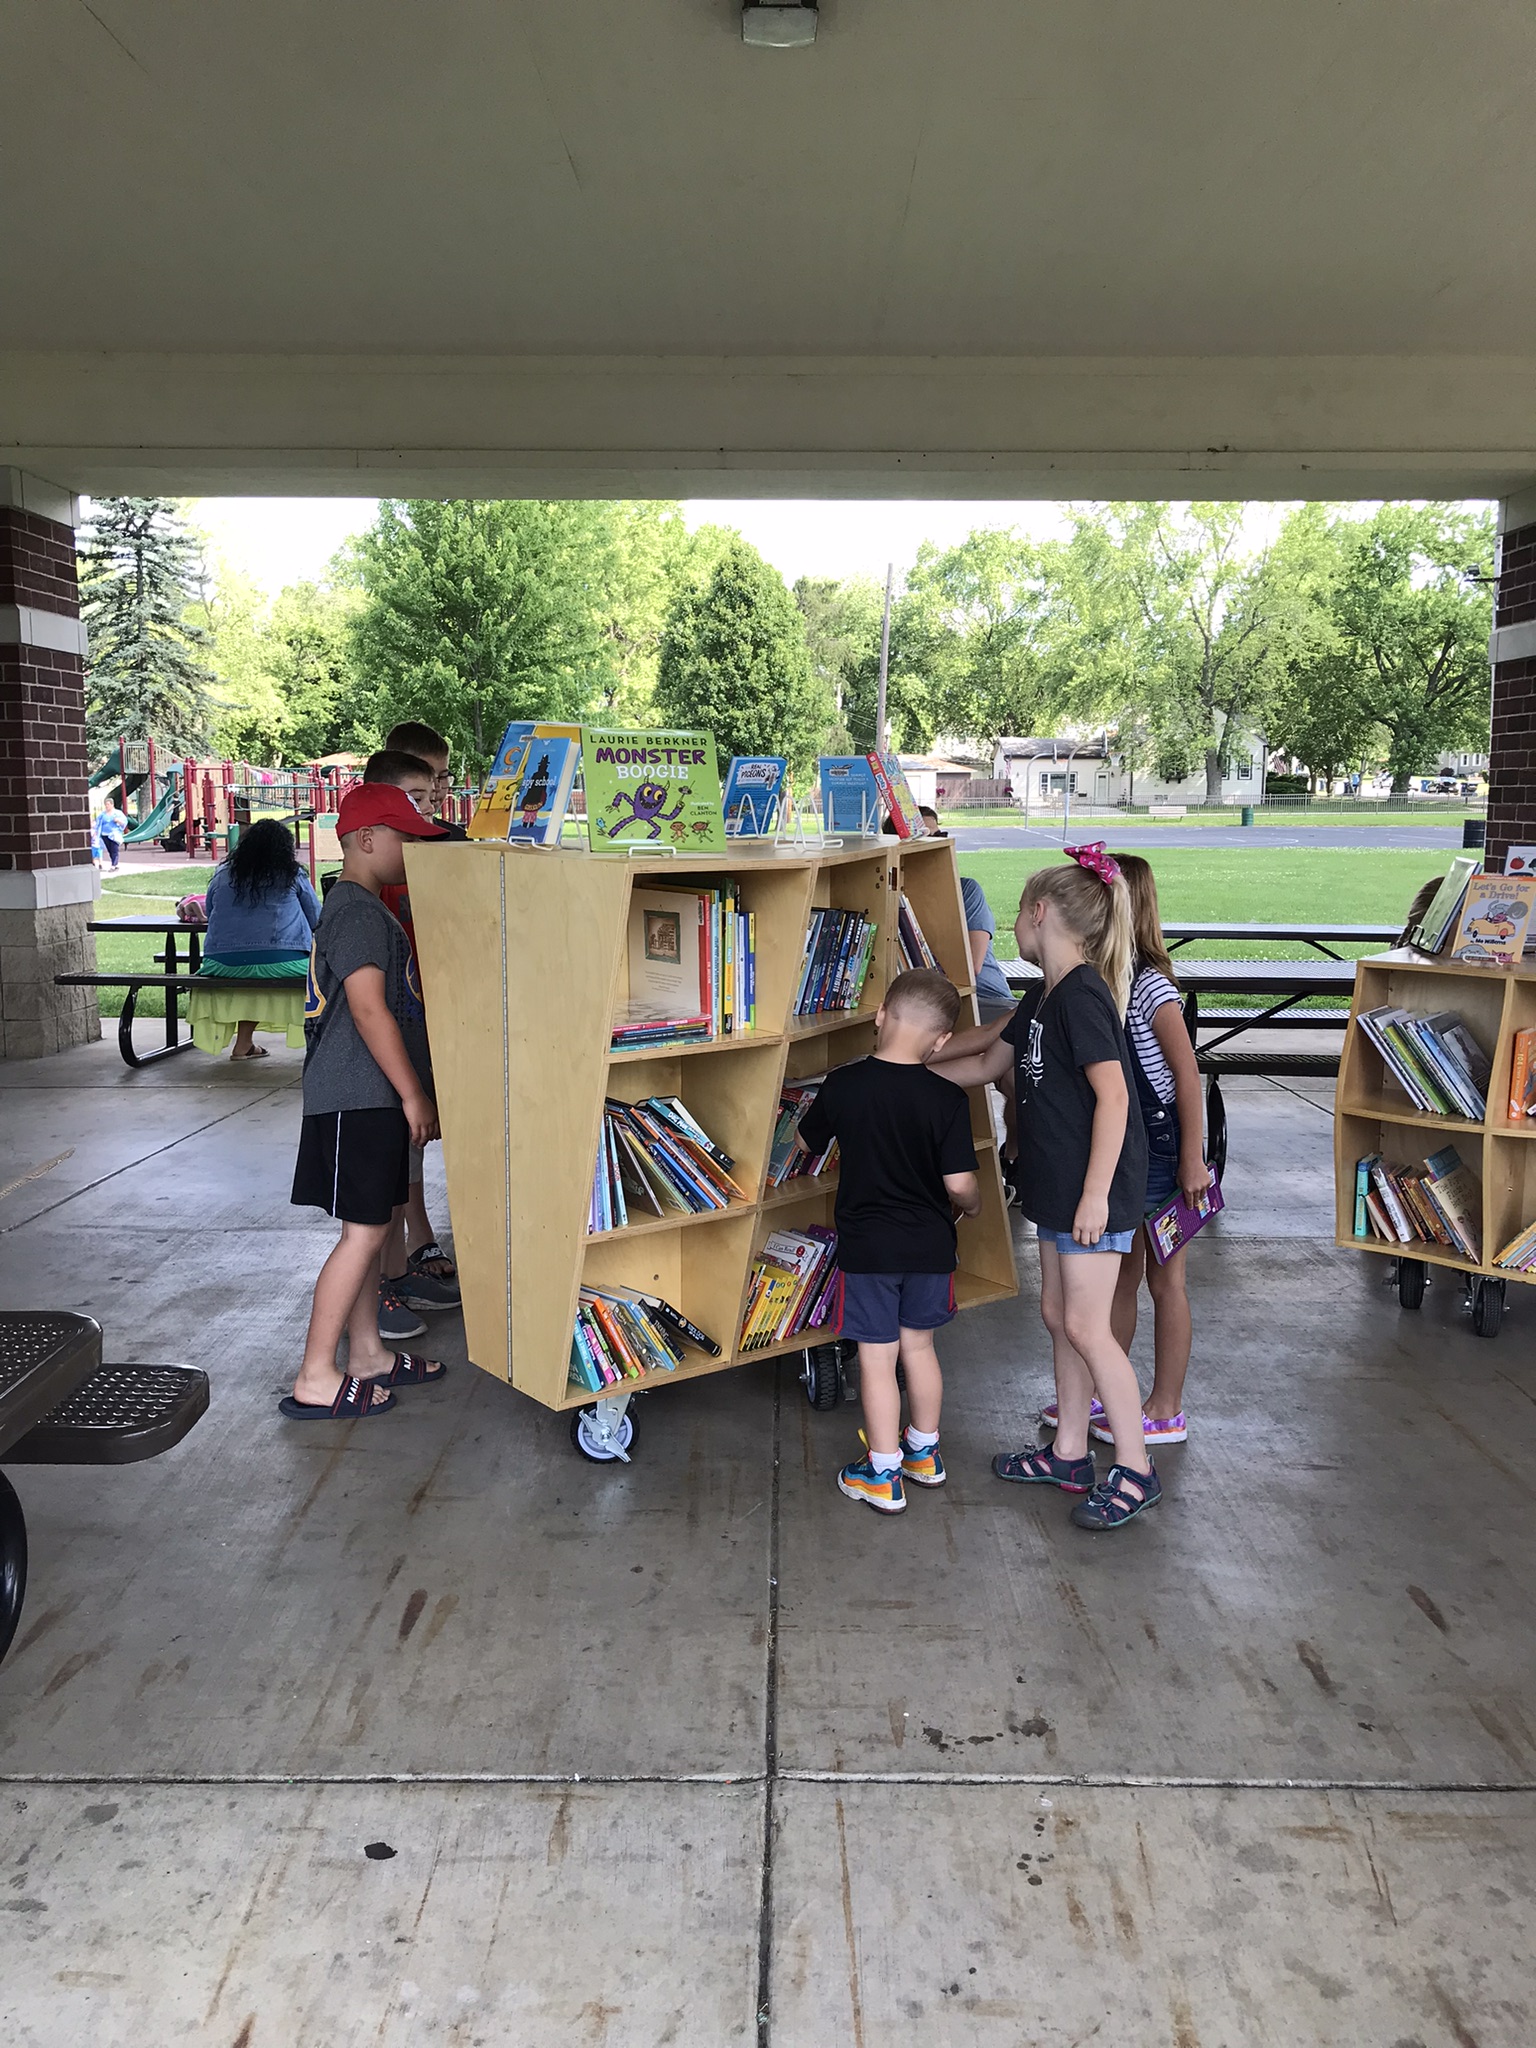 The first traveling UNI mobile library was a hit at Redar Park on Thursday, June 2, 2022! Check the schedule on our website for future stops this summer.